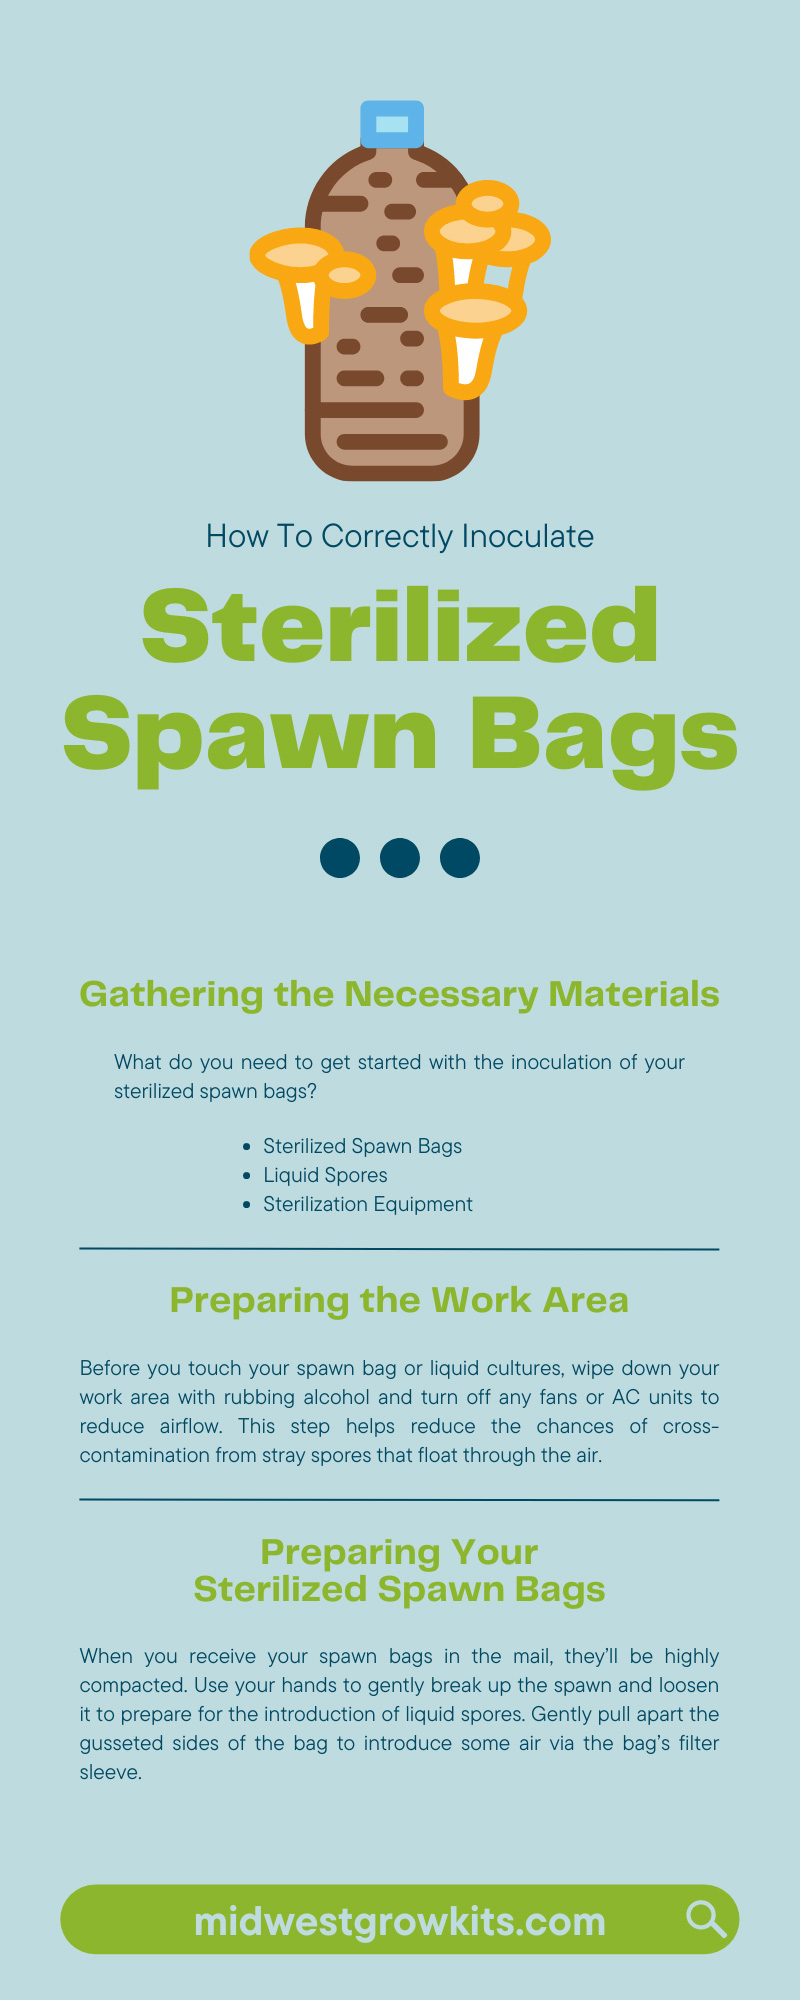 How To Correctly Inoculate Sterilized Spawn Bags